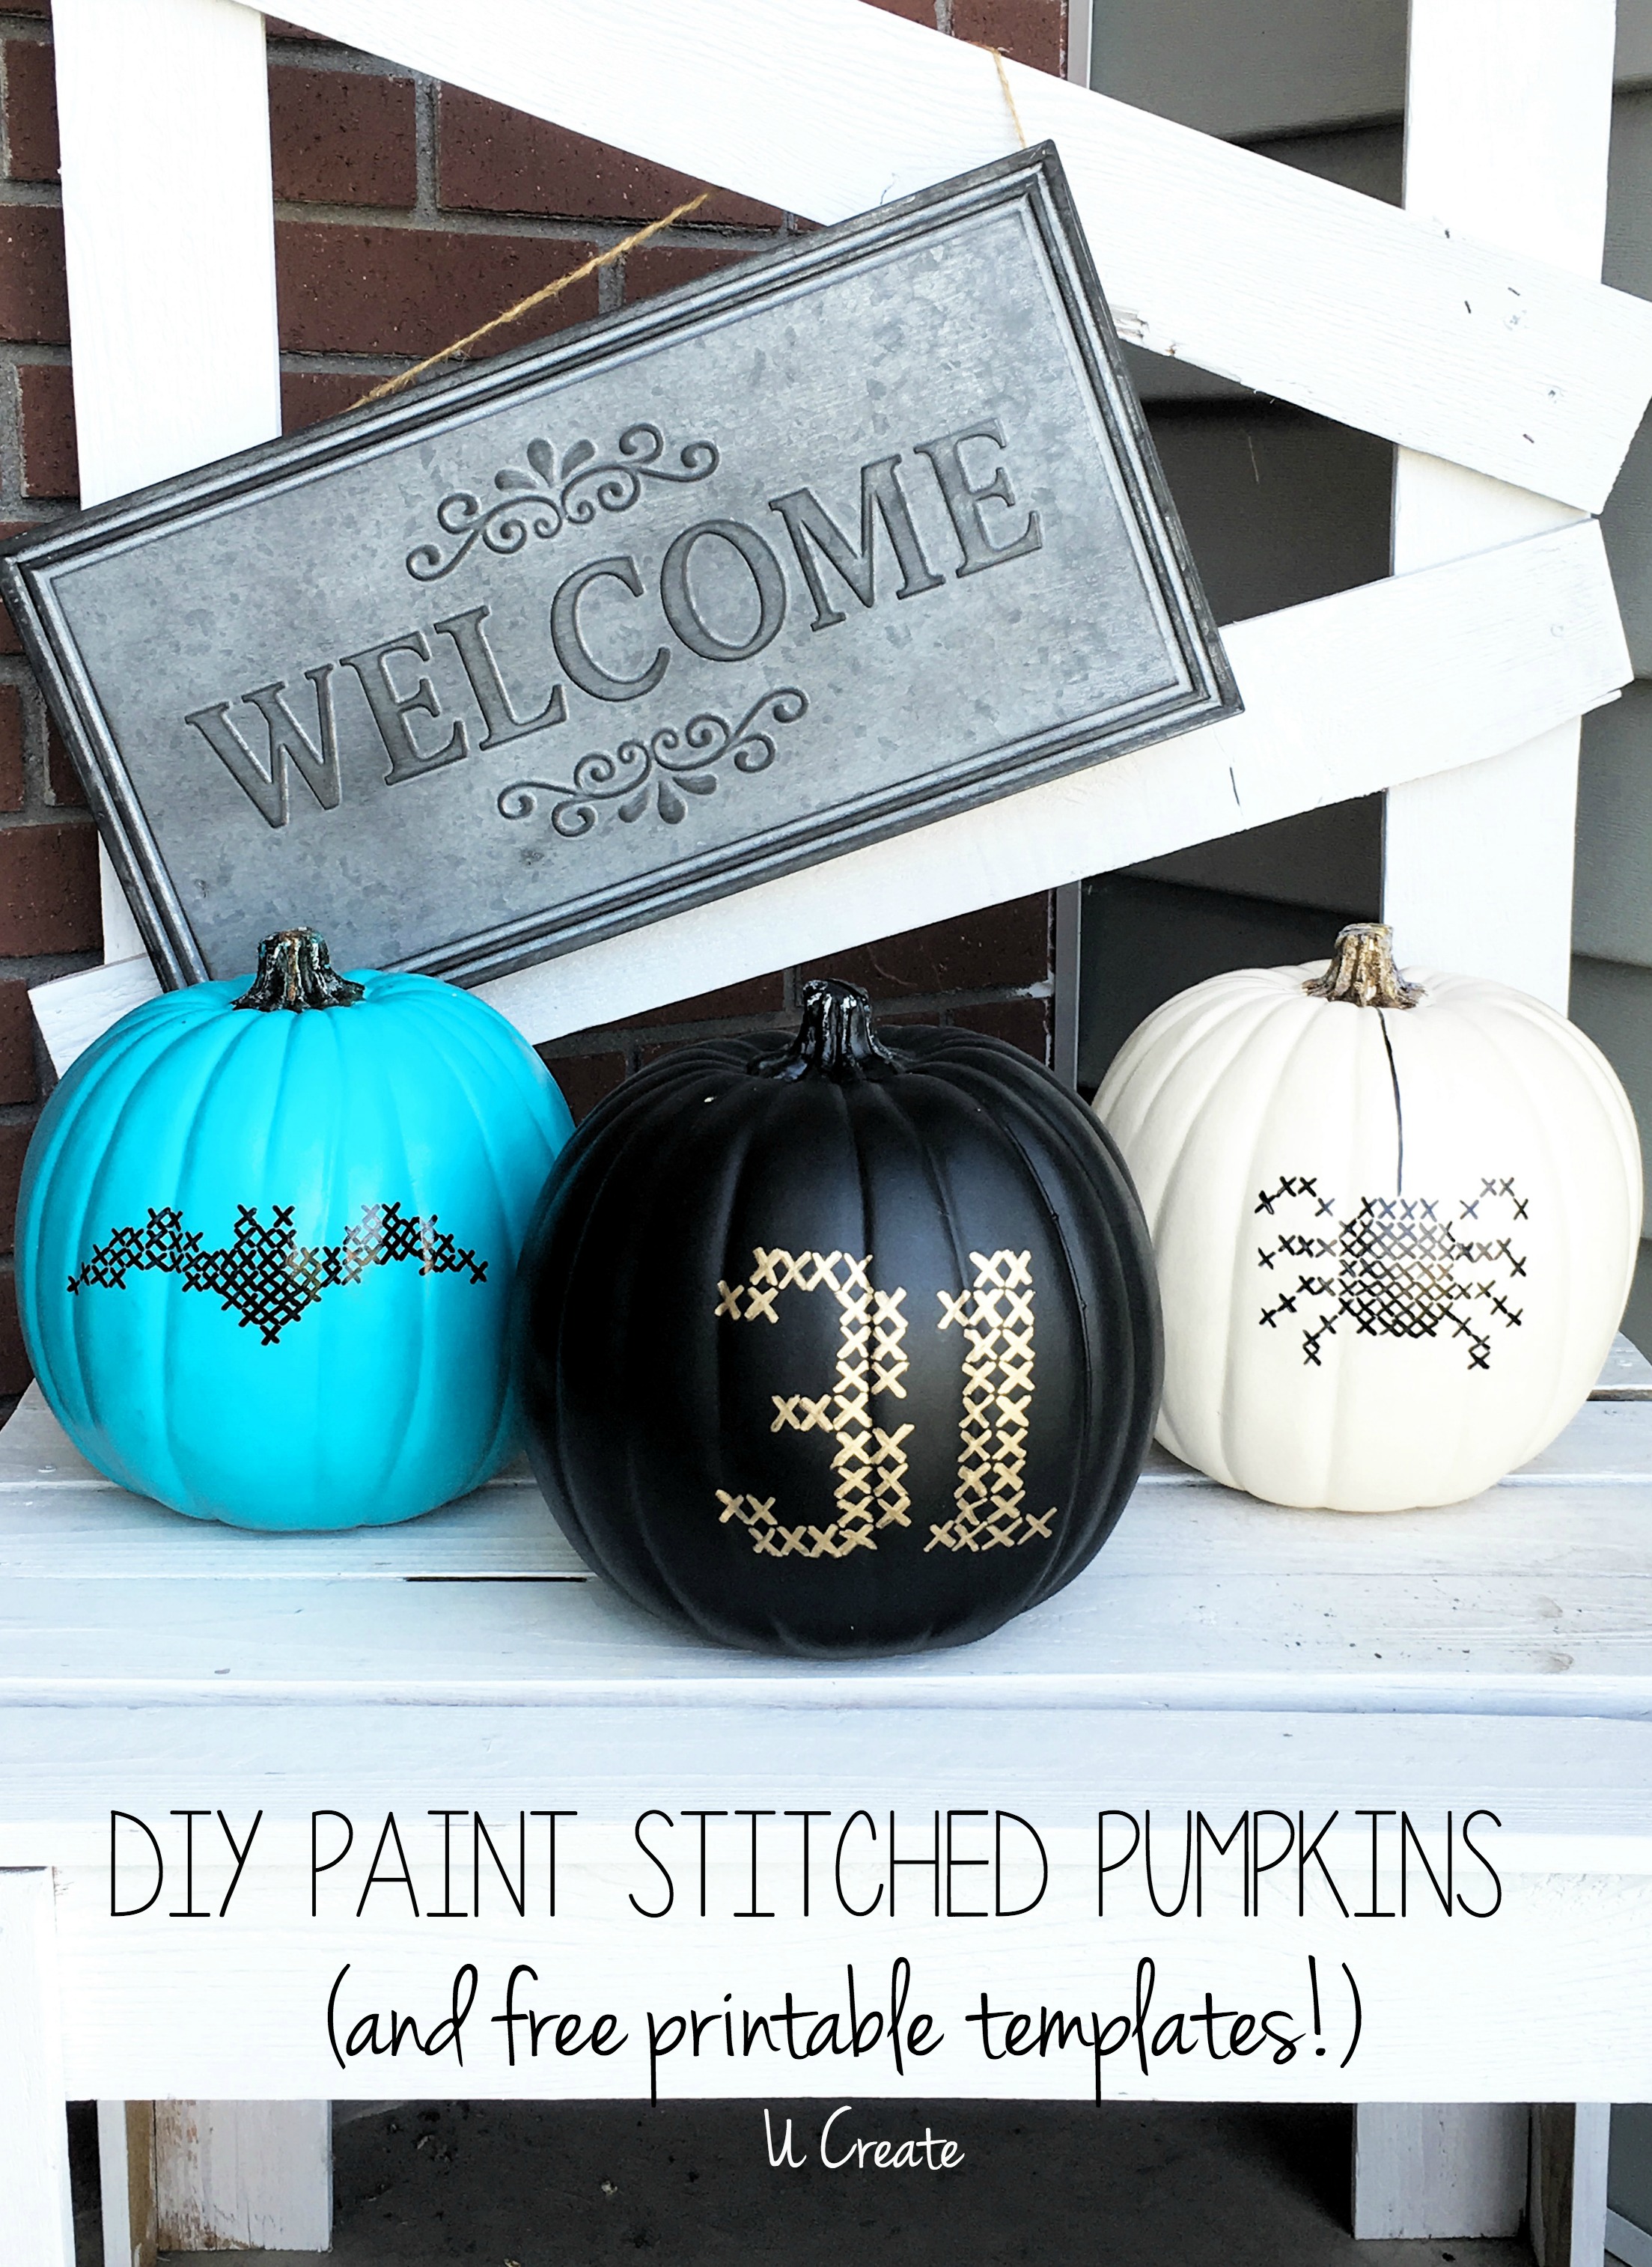 DIY Paint Stitched Pumpkins with free templates by U Create